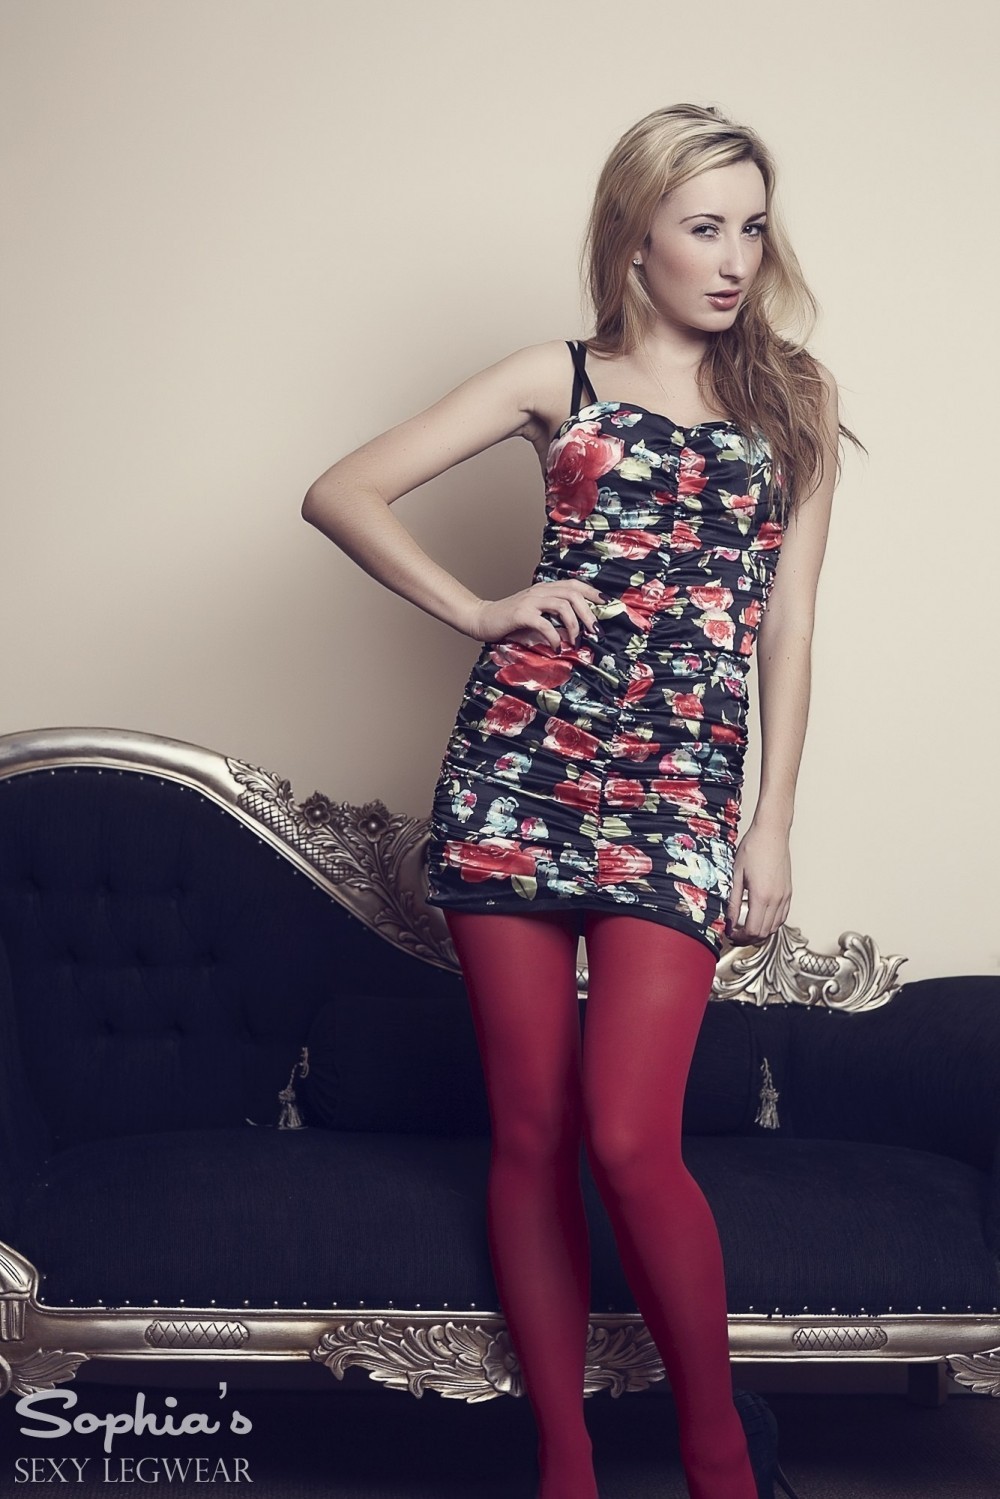 Sophia in her sexy floral satin dress with opaque tights #72339978